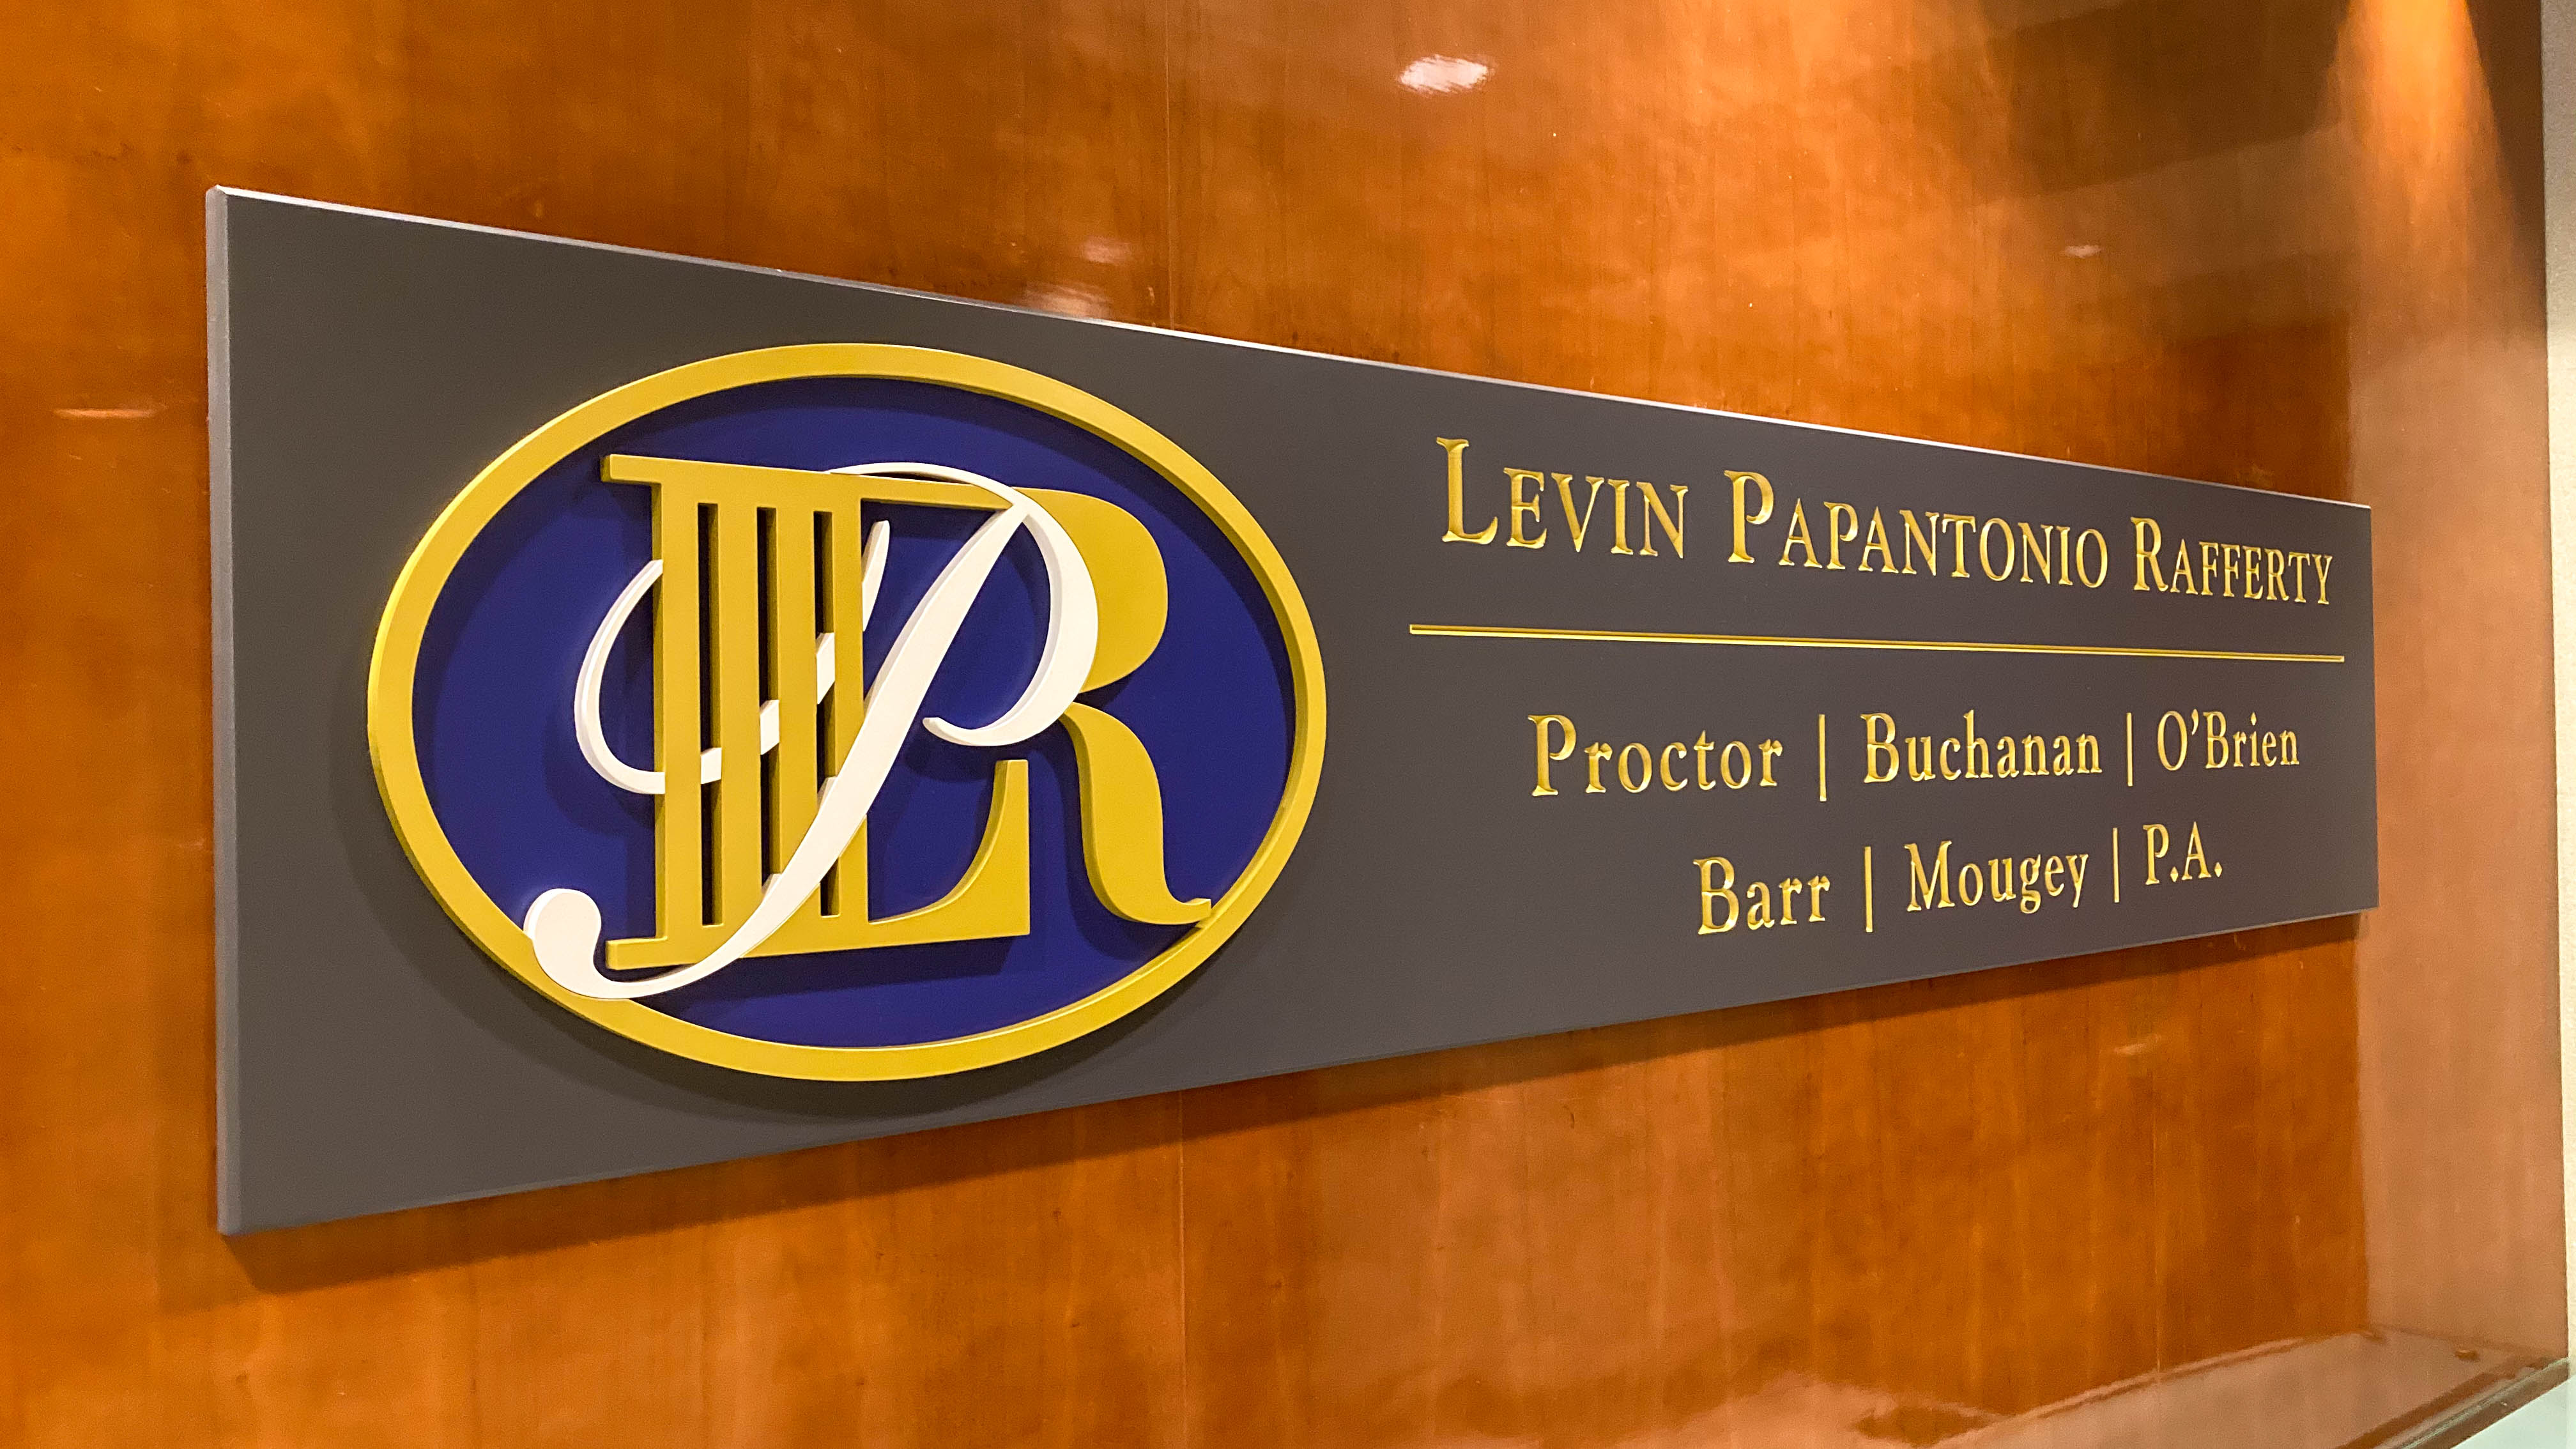 Dimensional business sign for Levin Papantonio Rafferty